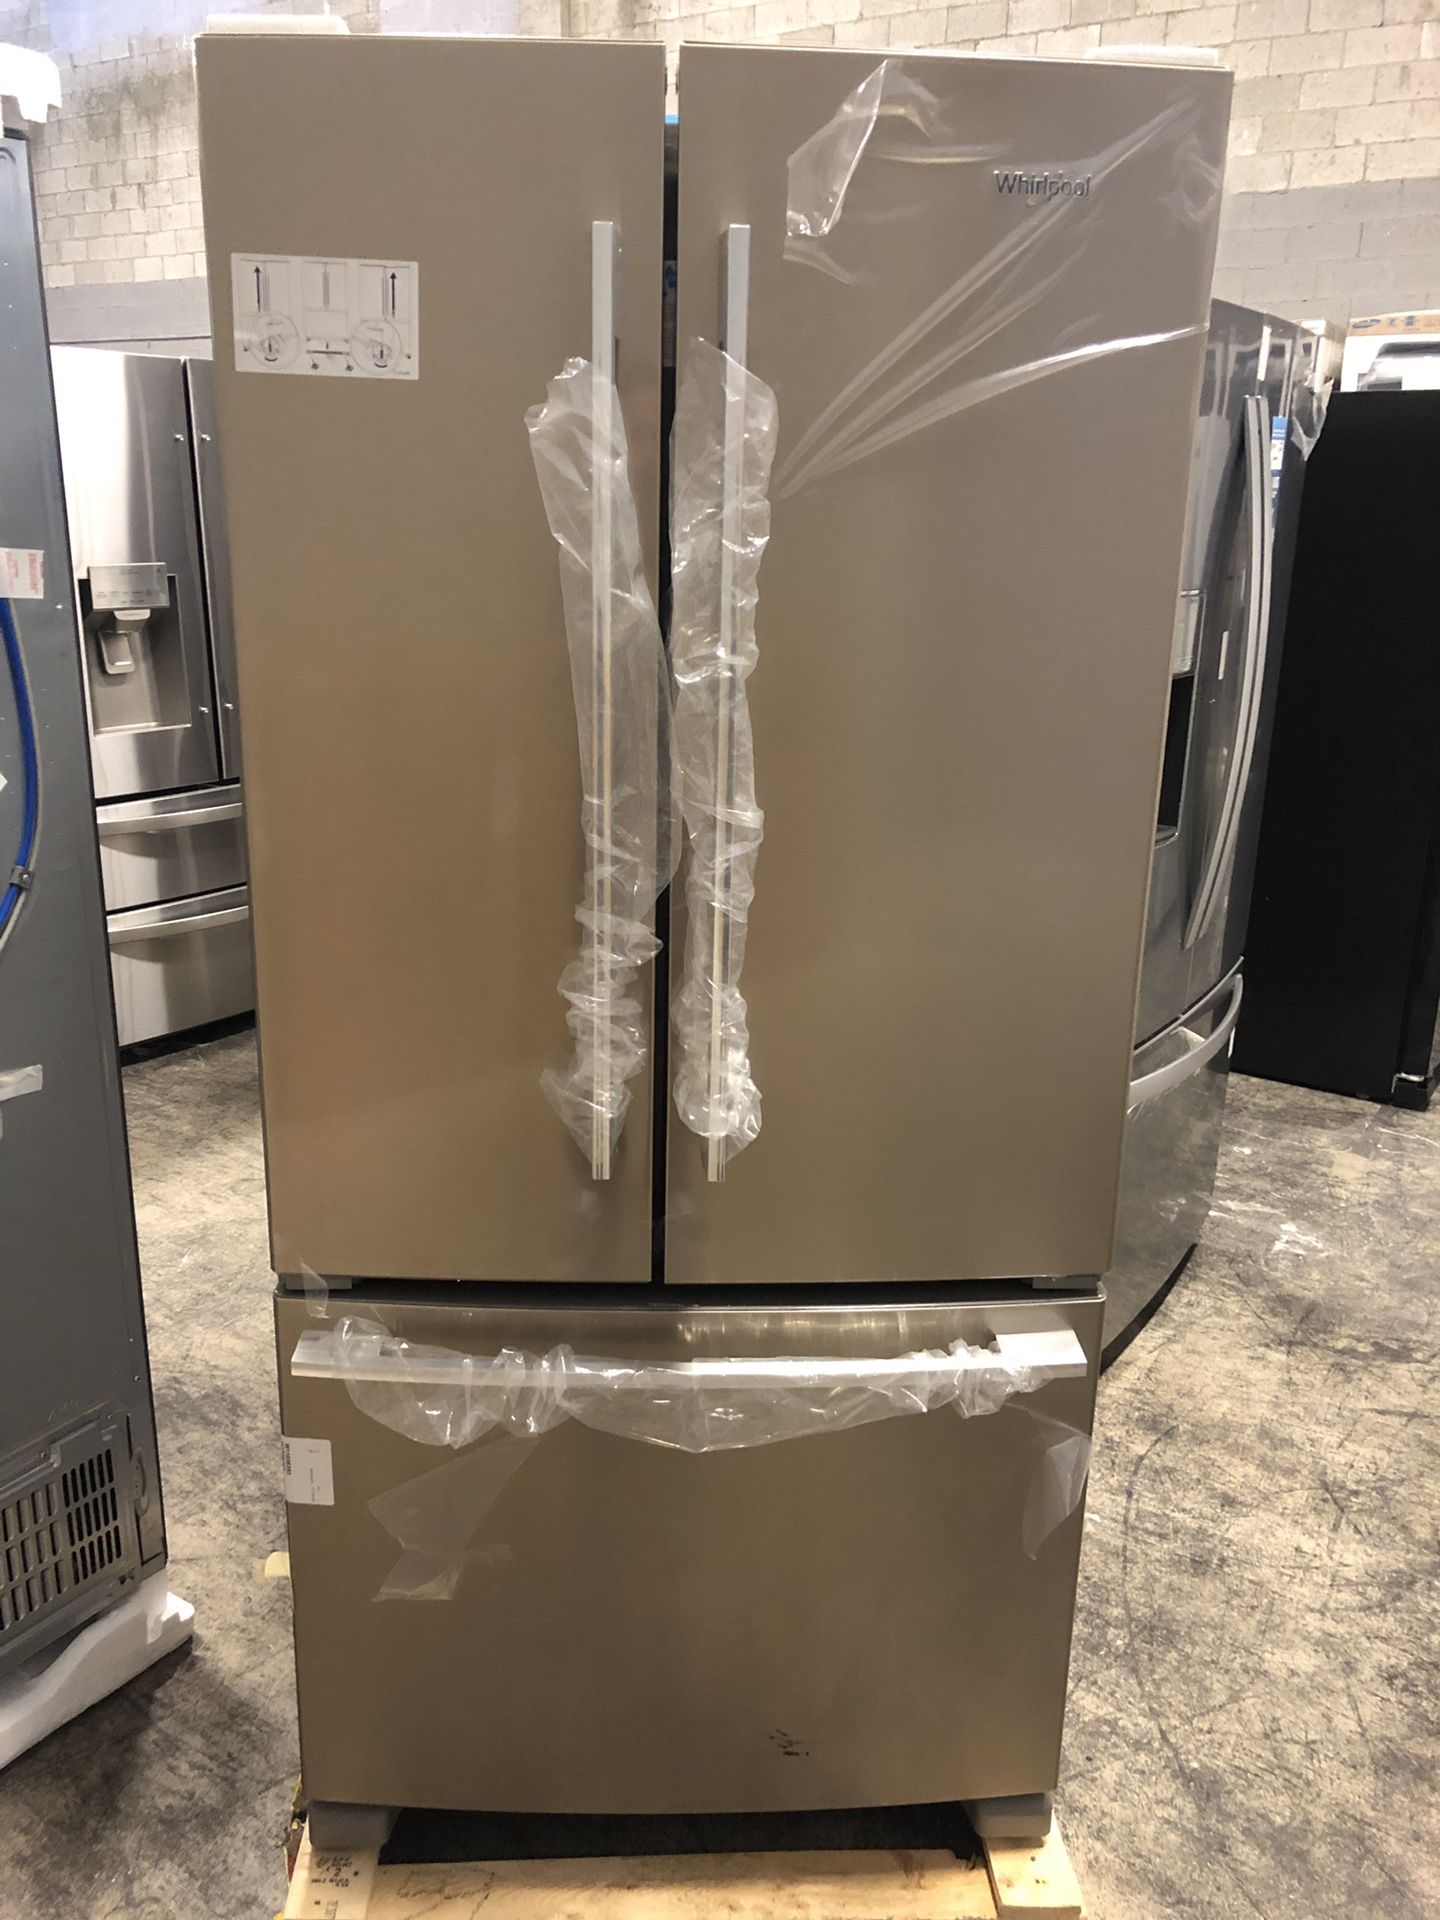 Whirlpool 22 cu.ft. French Door Refrigerator in Sunset Bronze EZ Financing Available